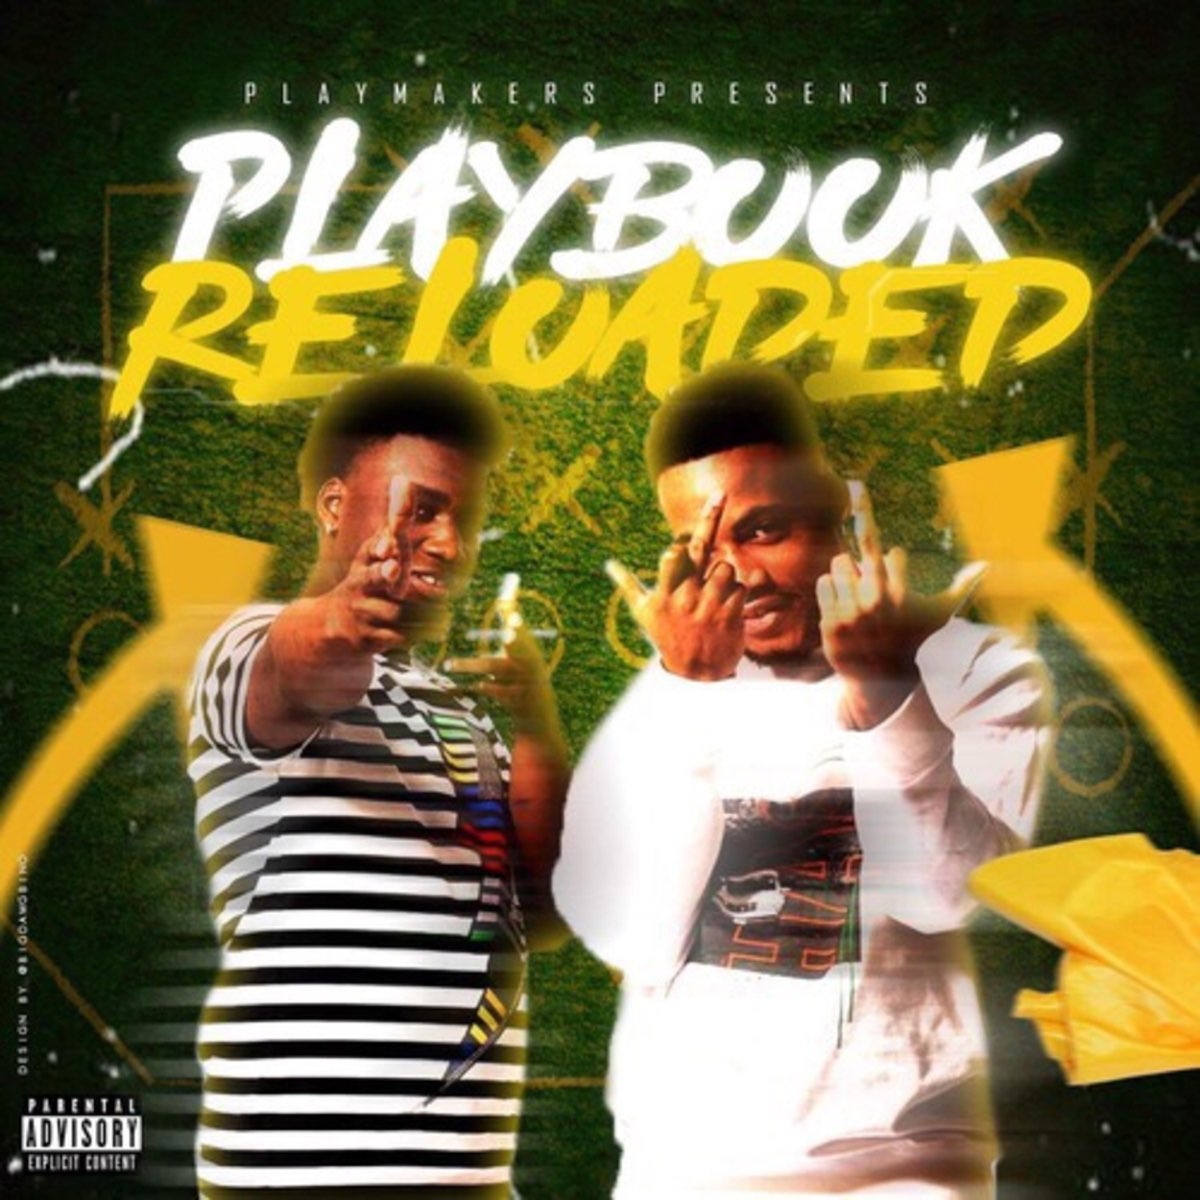 ‎PlayBook Reloaded by PlayMakers, Prodijae & DMP 56 on Apple Music